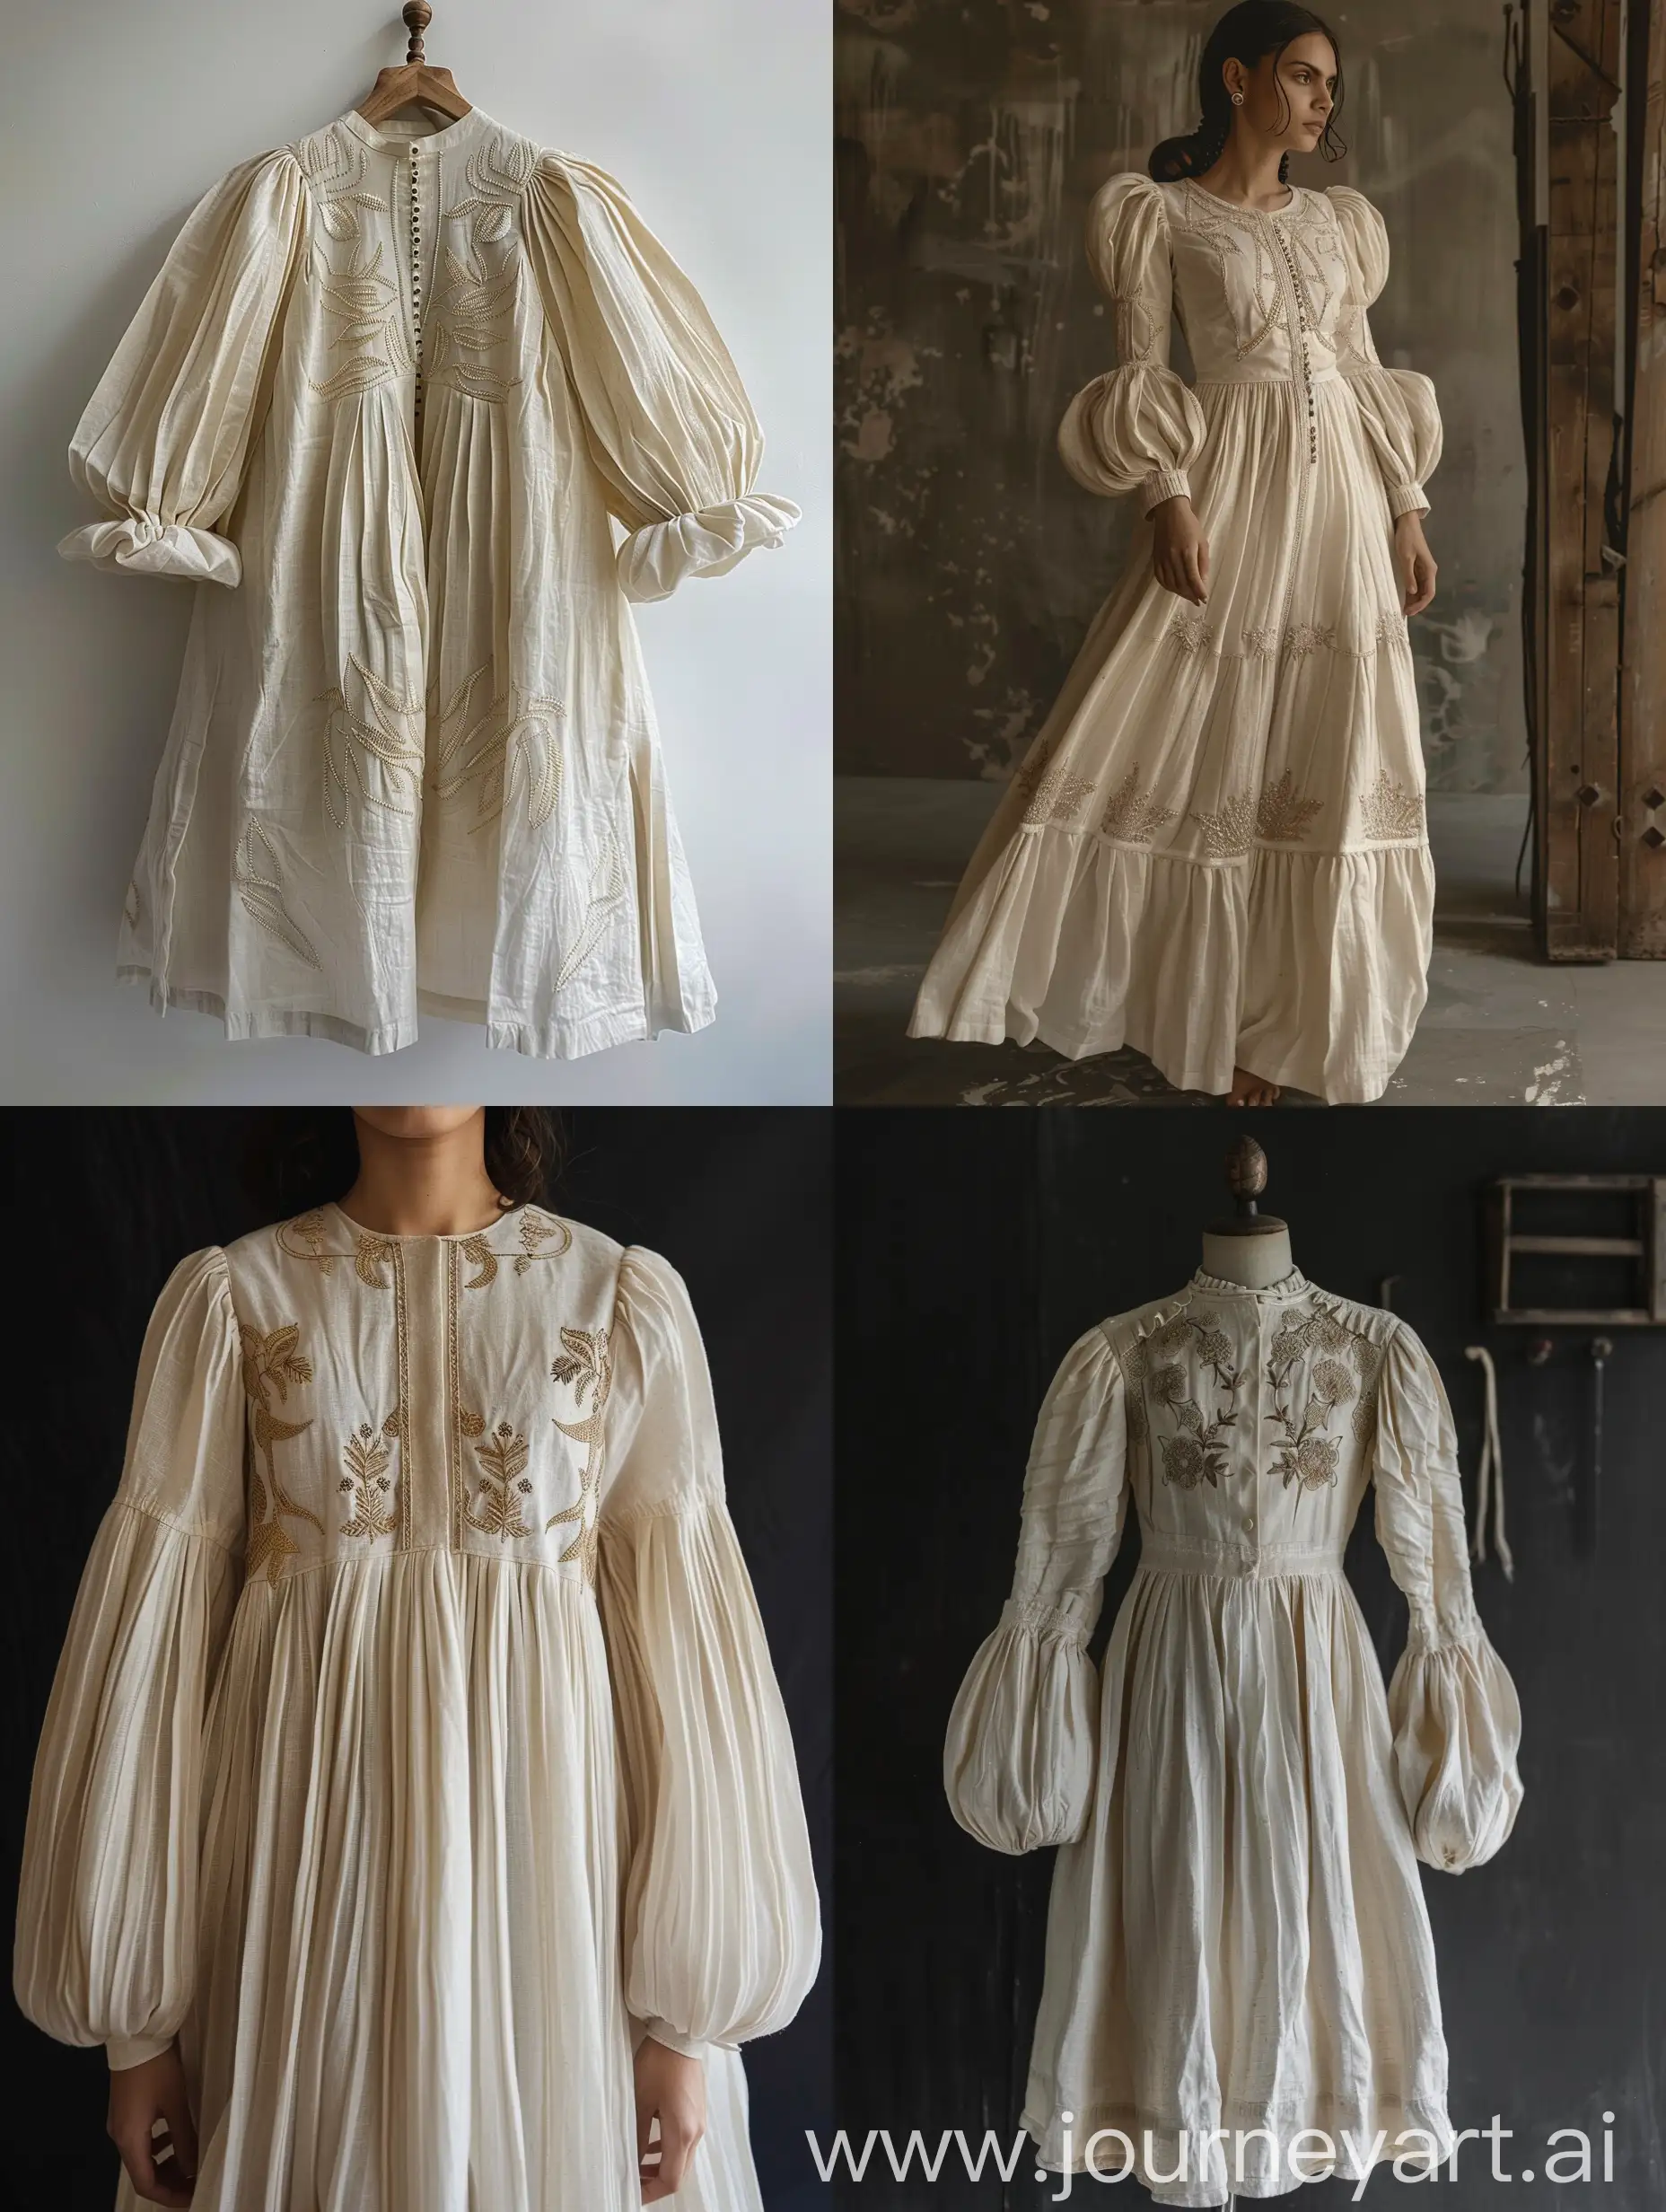 Dress, long dress length, linen material, cream color, handmade embroidery, pleated and puffy sleeves